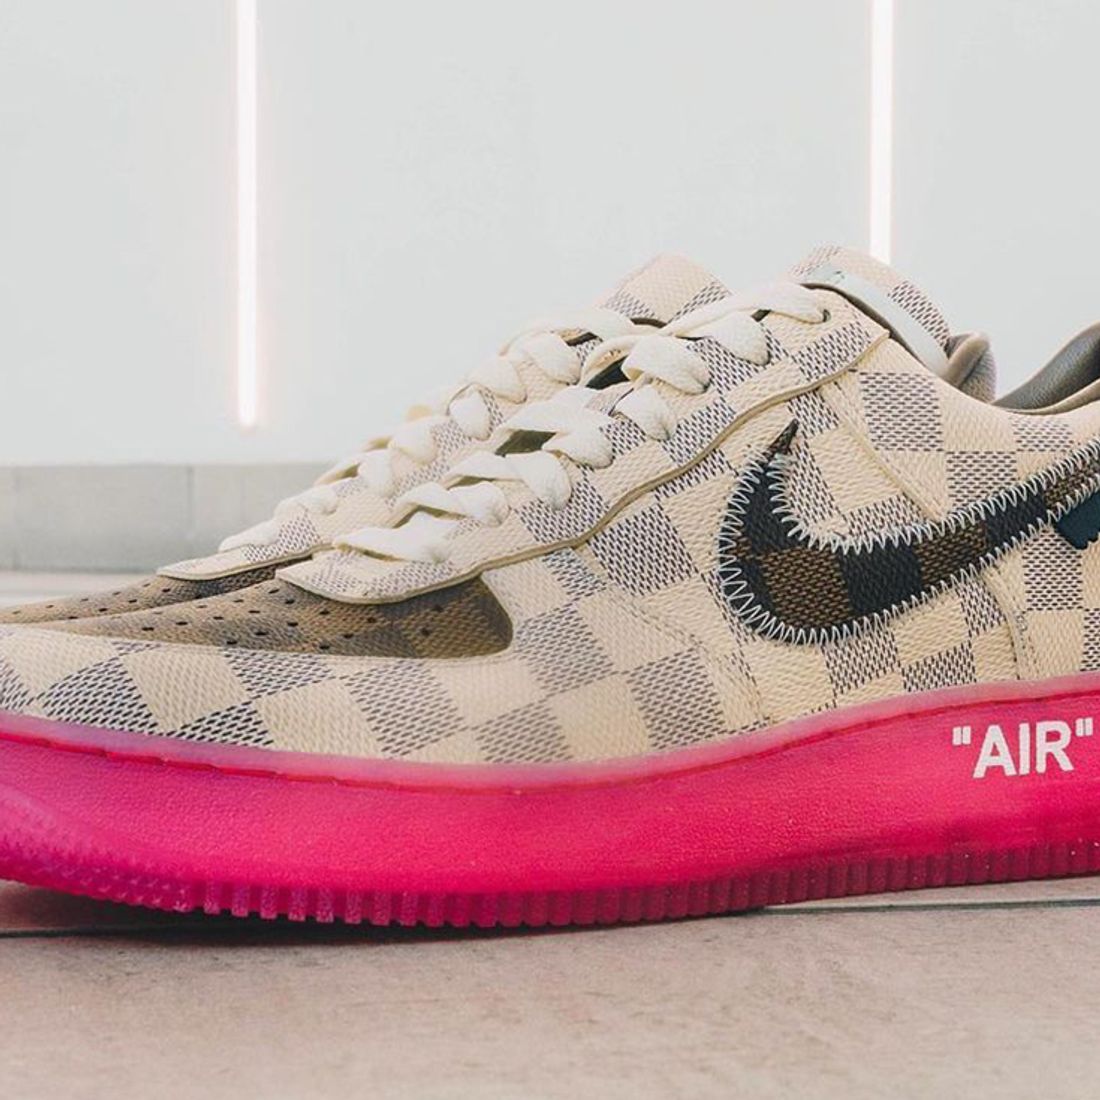 Louis Vuitton Off-White Nike Air Force 1 Release Info